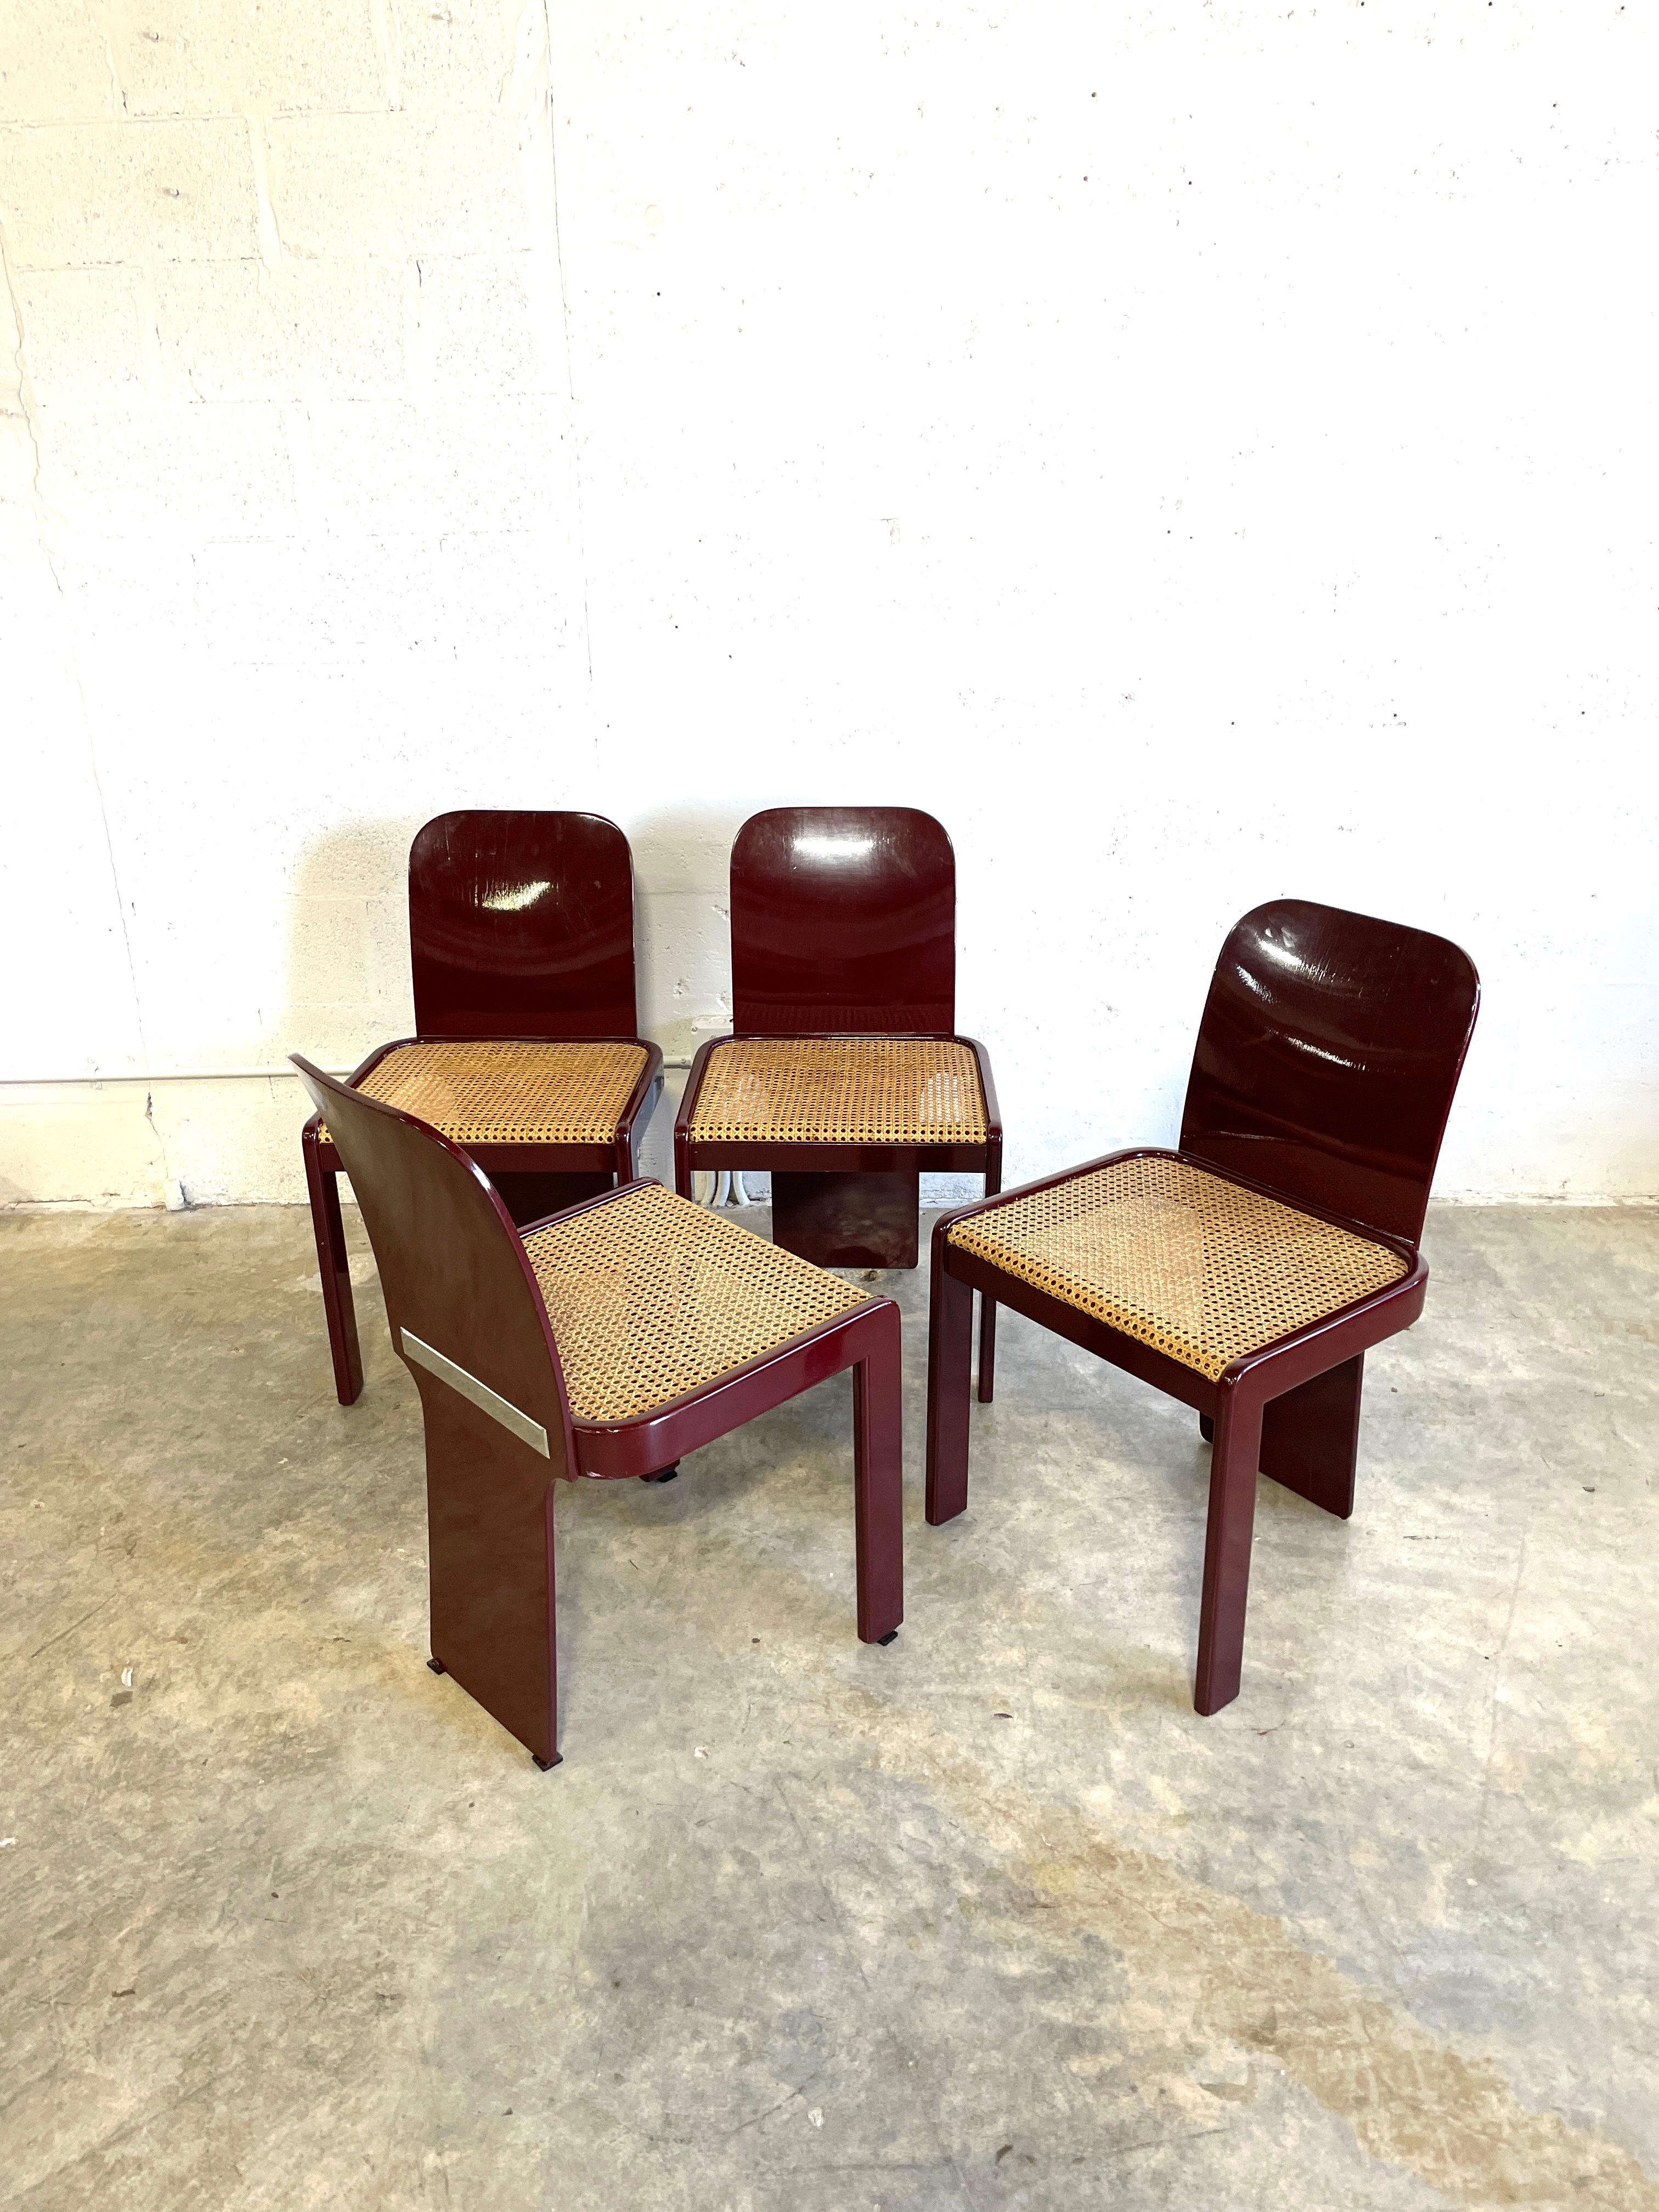 Set of 4 Pierluigi Molinari lacquered dining chairs. Made in Italy. Original burgundy color. 